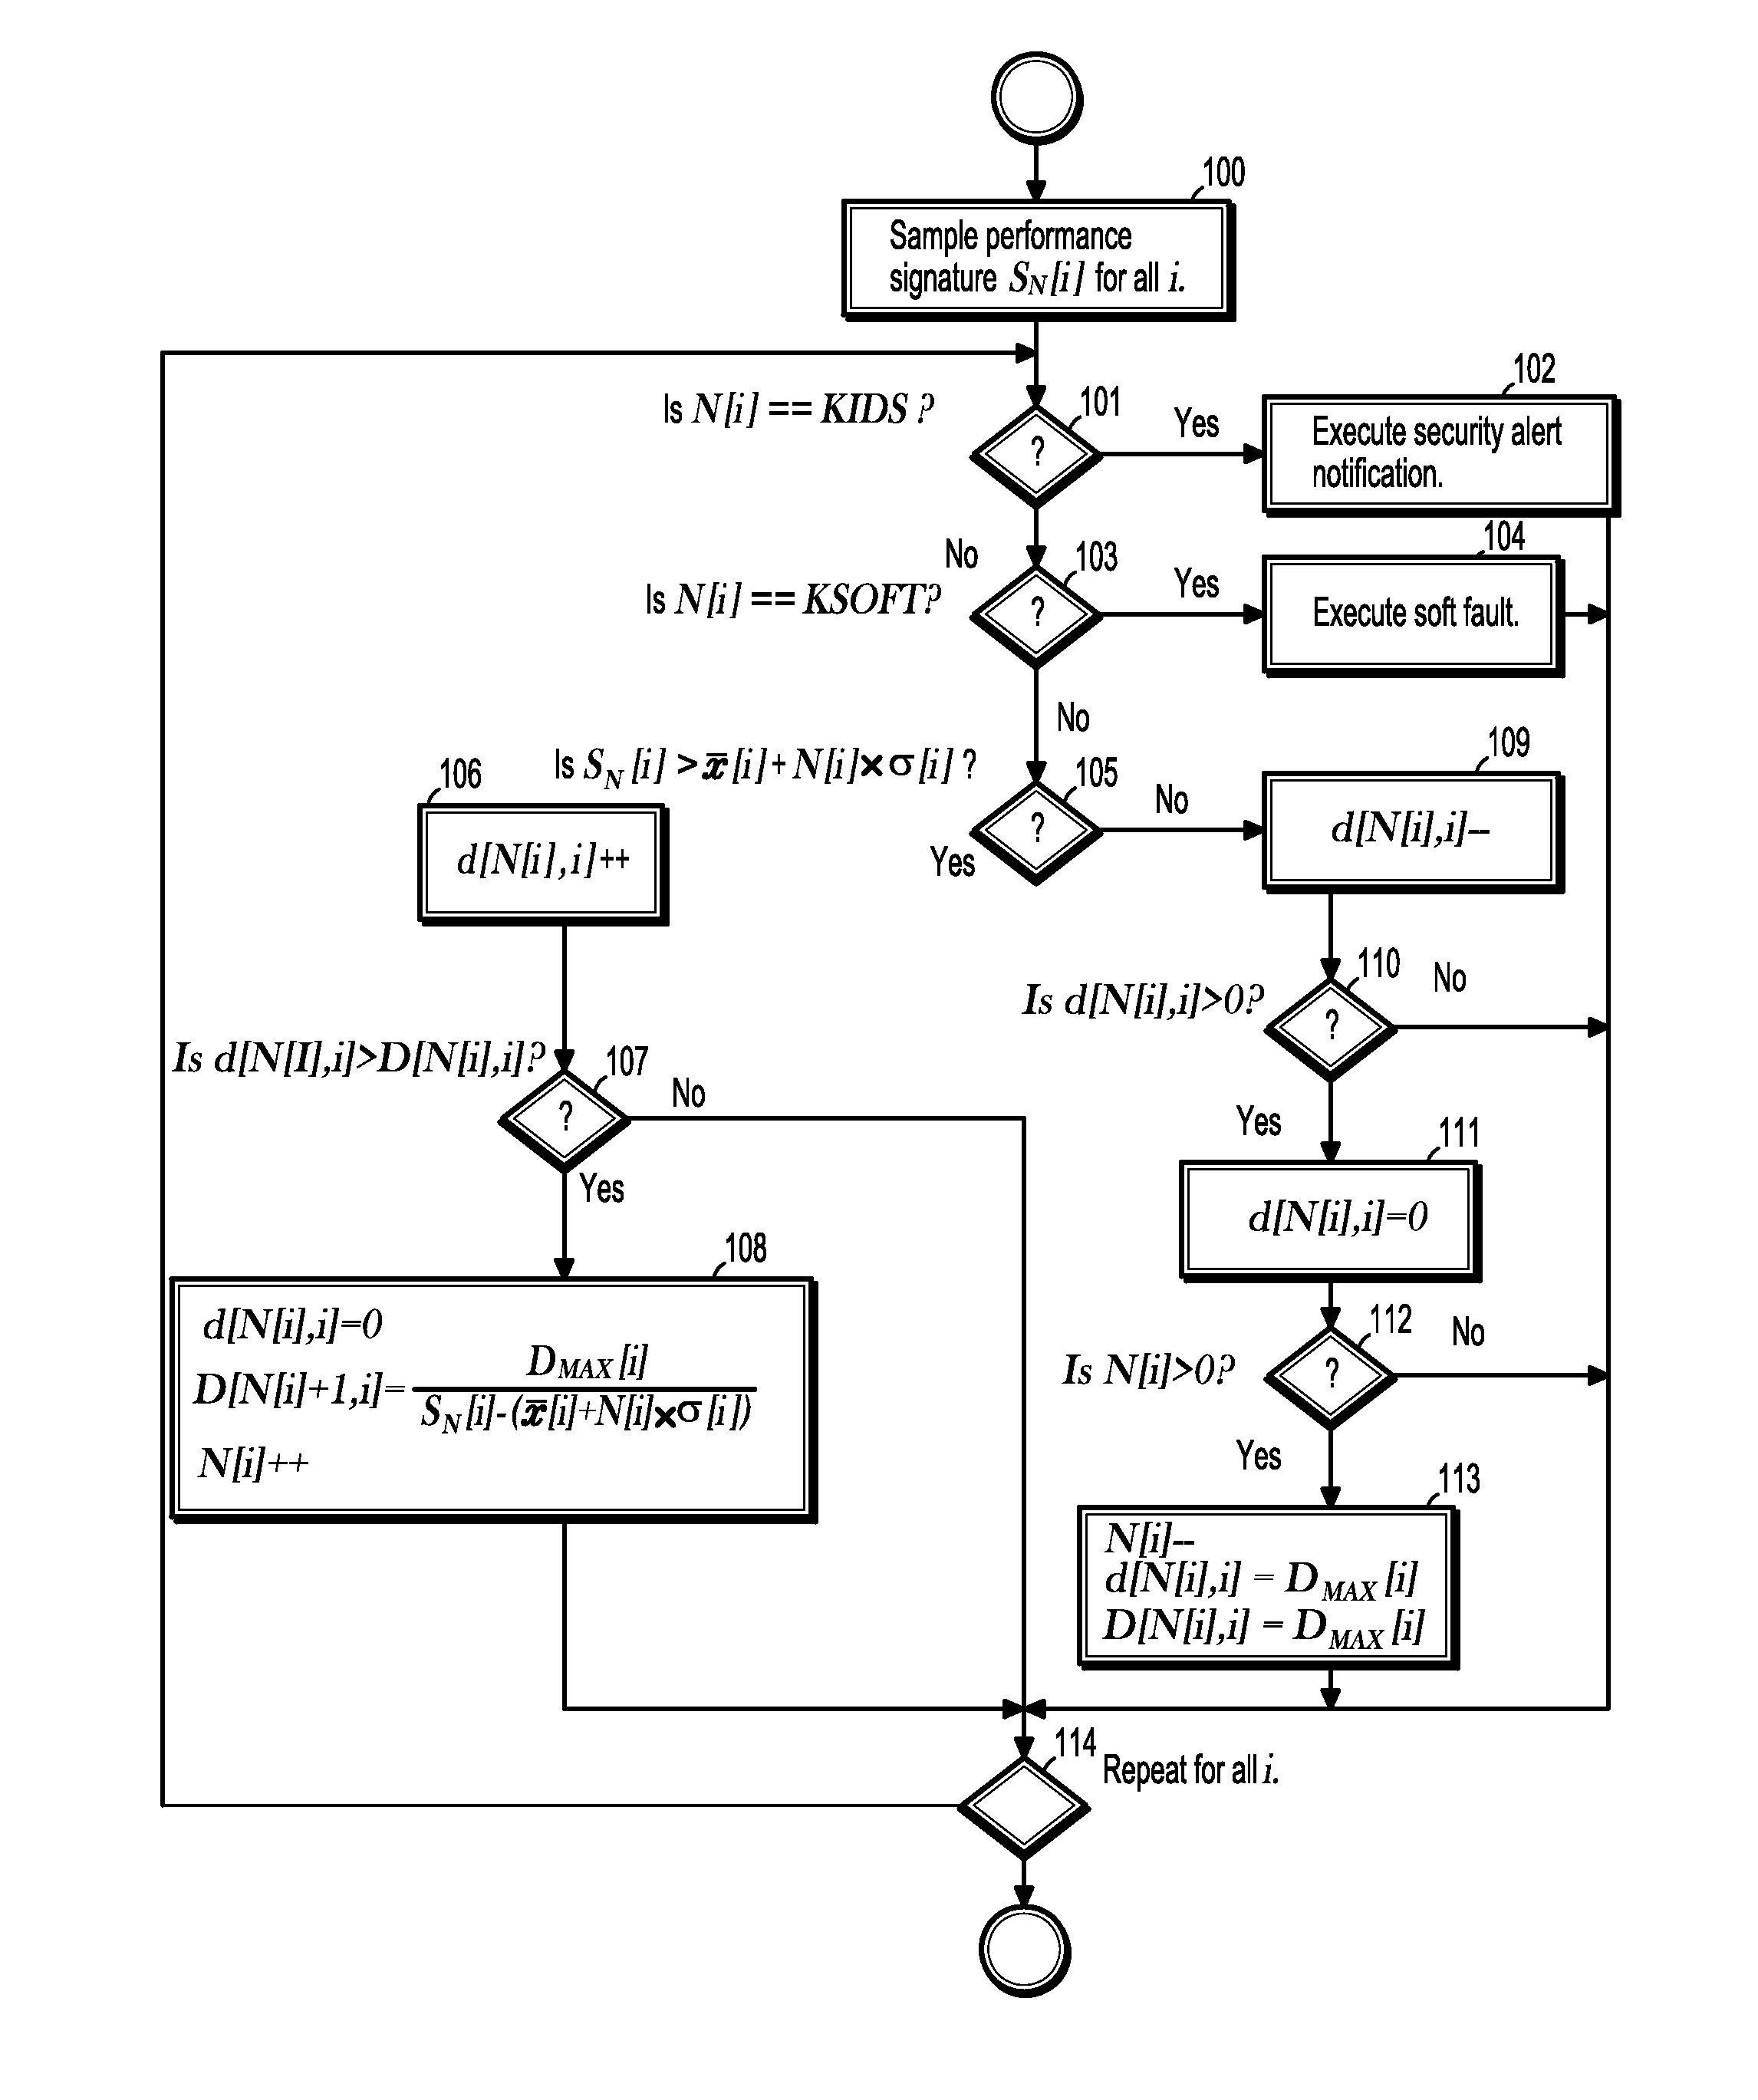 System and Method for Detecting Security Intrusions and Soft Faults Using Performance Signatures